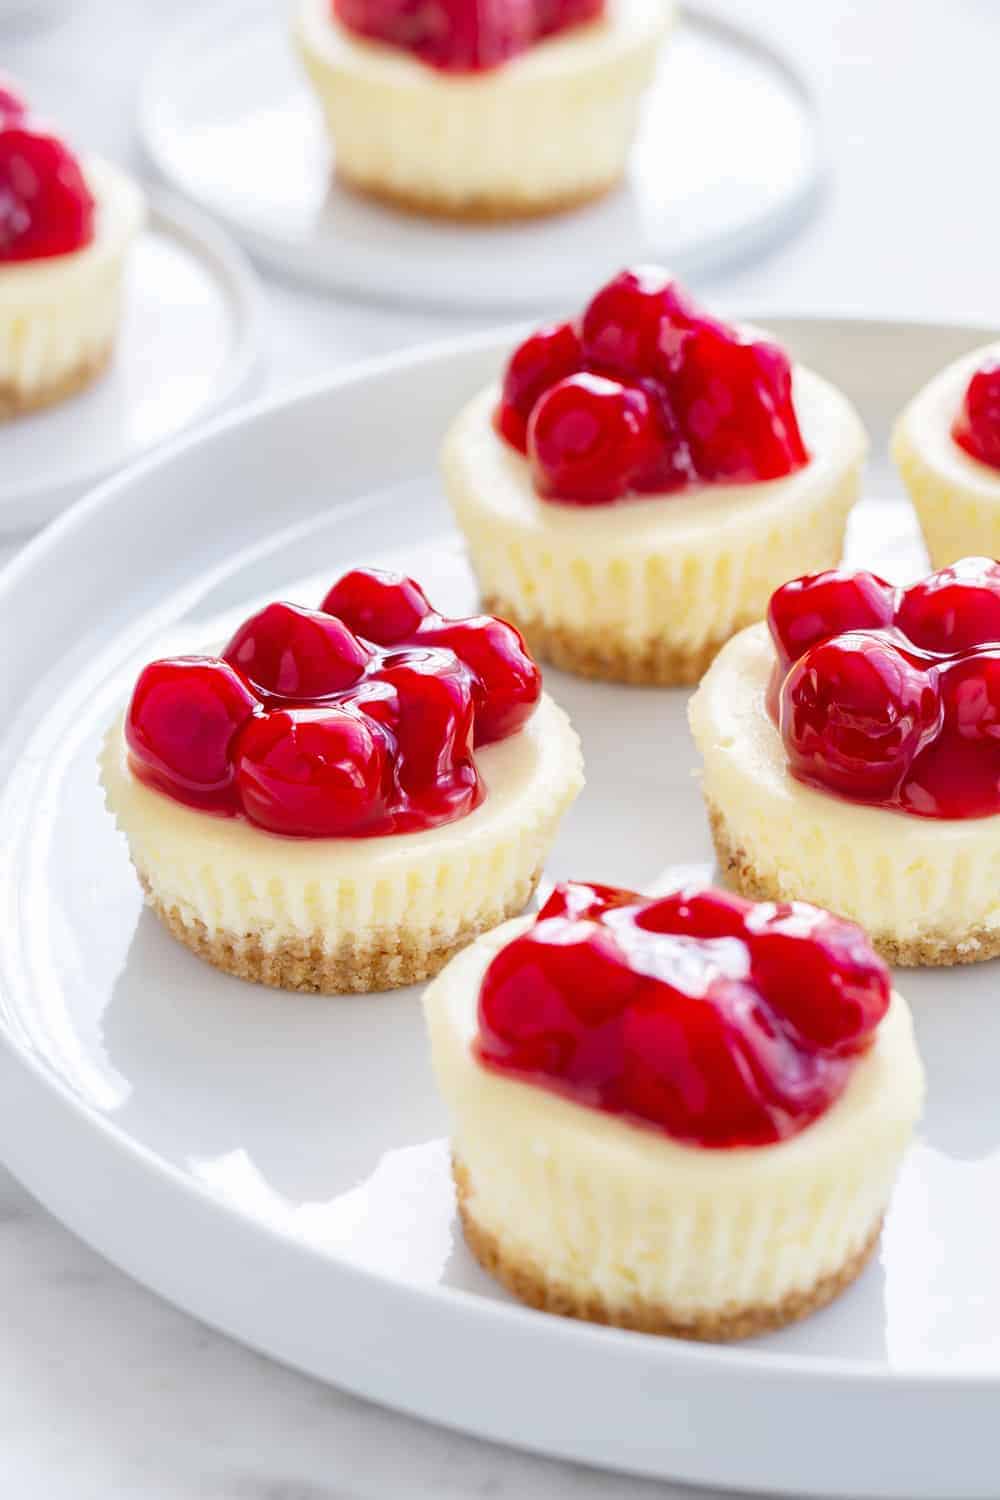 Mini Cherry Almond Cheesecakes are a simple and delicious sweet treat for just about any occasion. They're fun to make, and even more fun to eat!